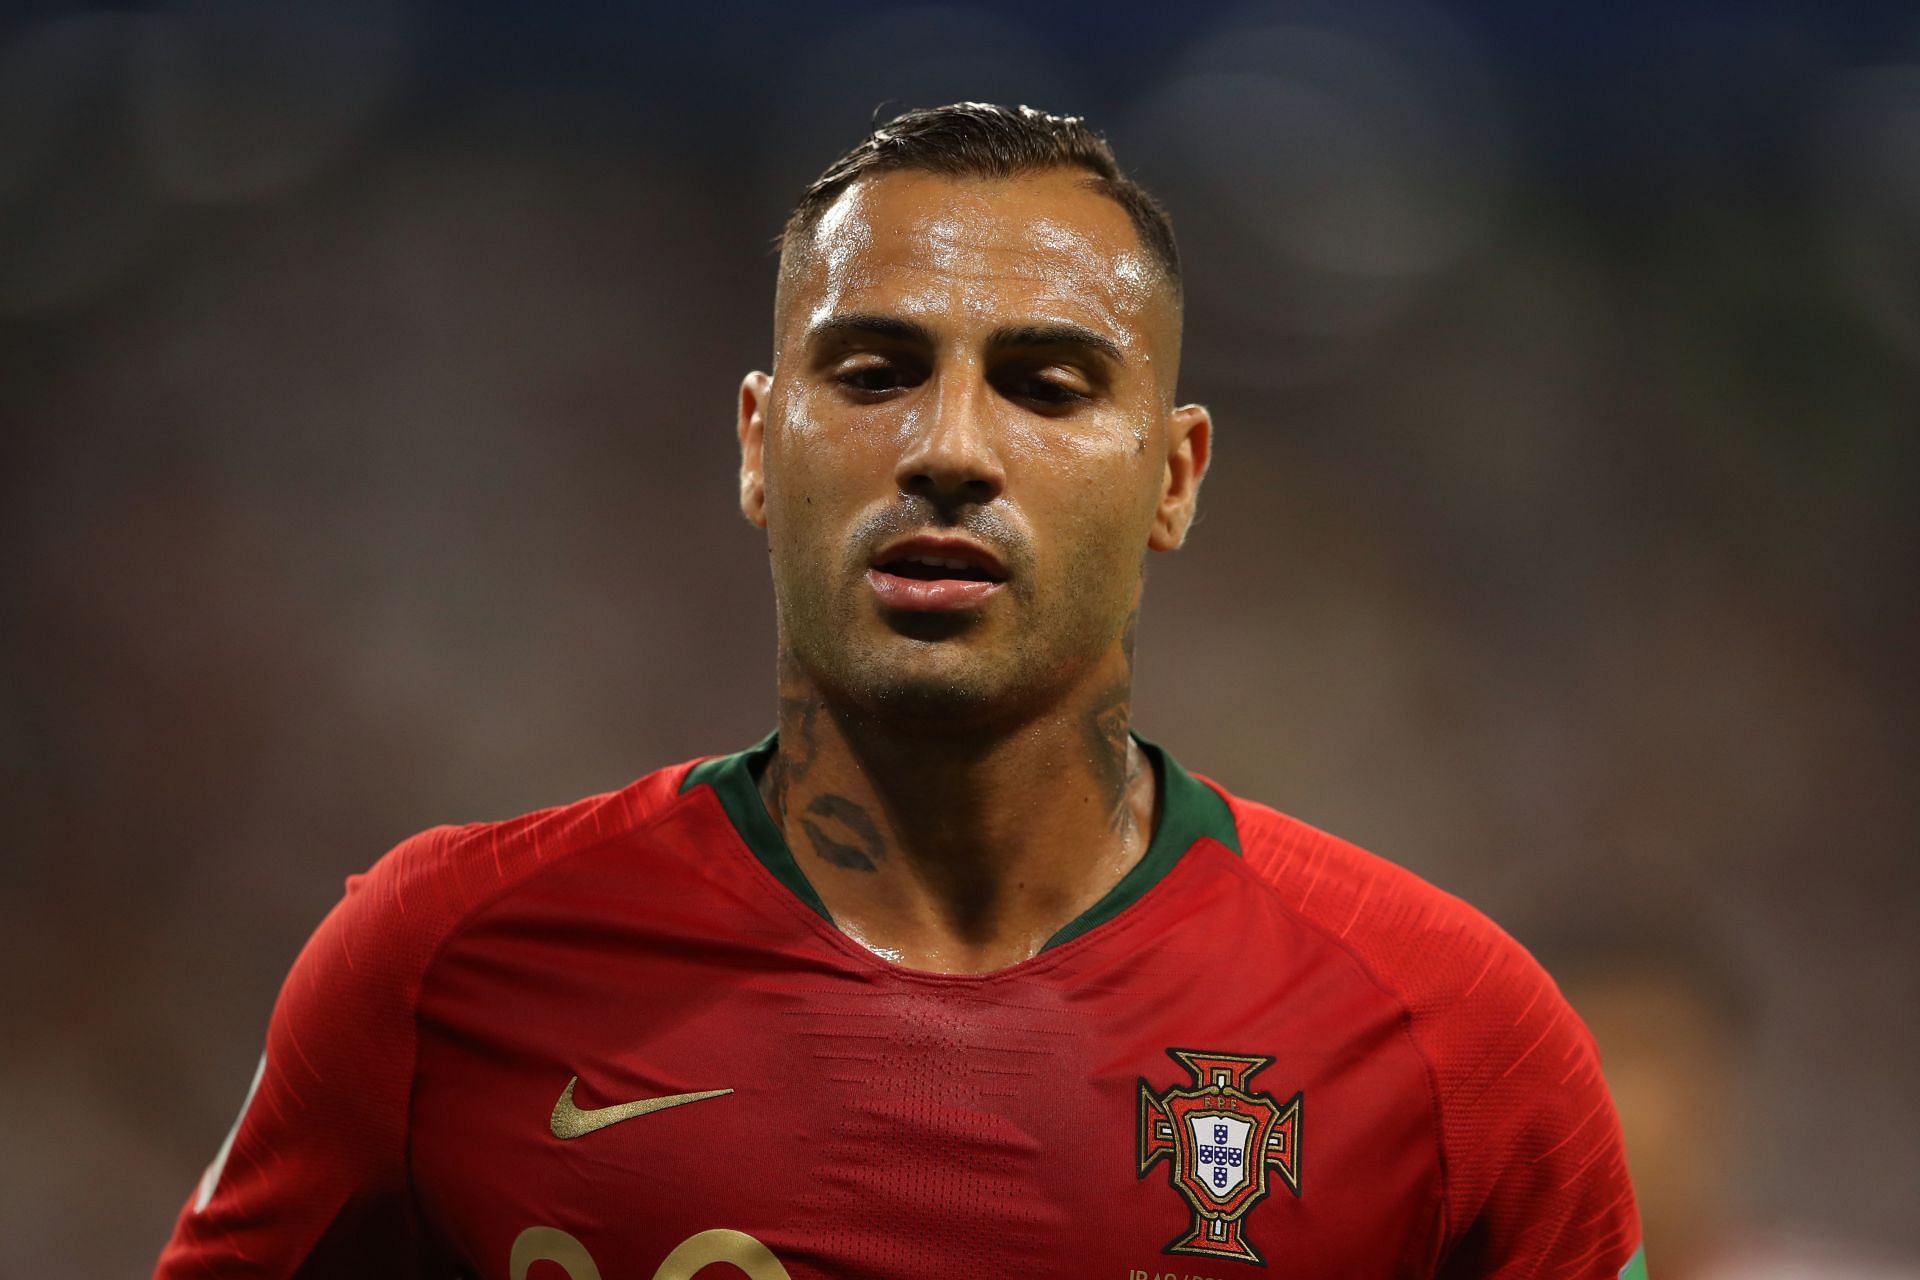 Quaresma is one of the most technically gifted wingers of all time